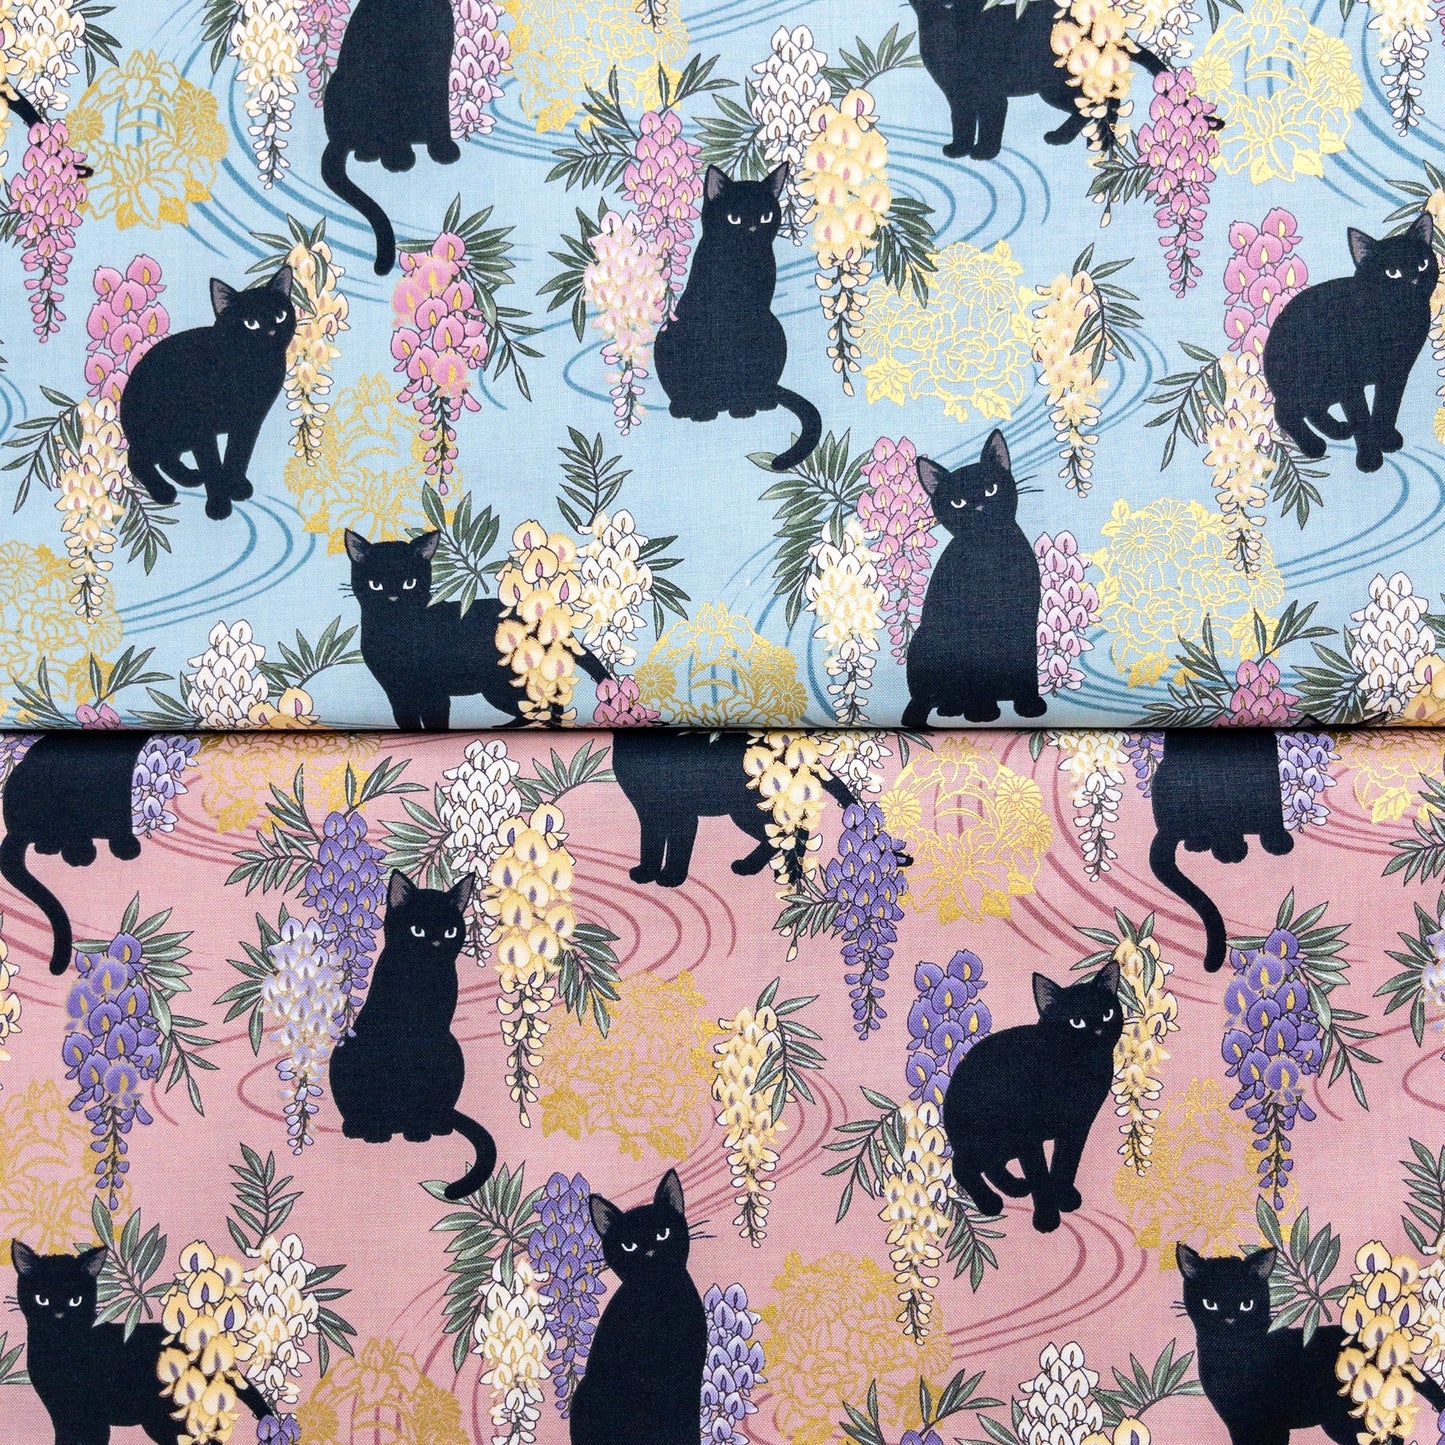 Quilt Gate | bronzing wisteria flowers and black cats 燙金紫藤花黑貓 | cotton printed sheeting 純棉